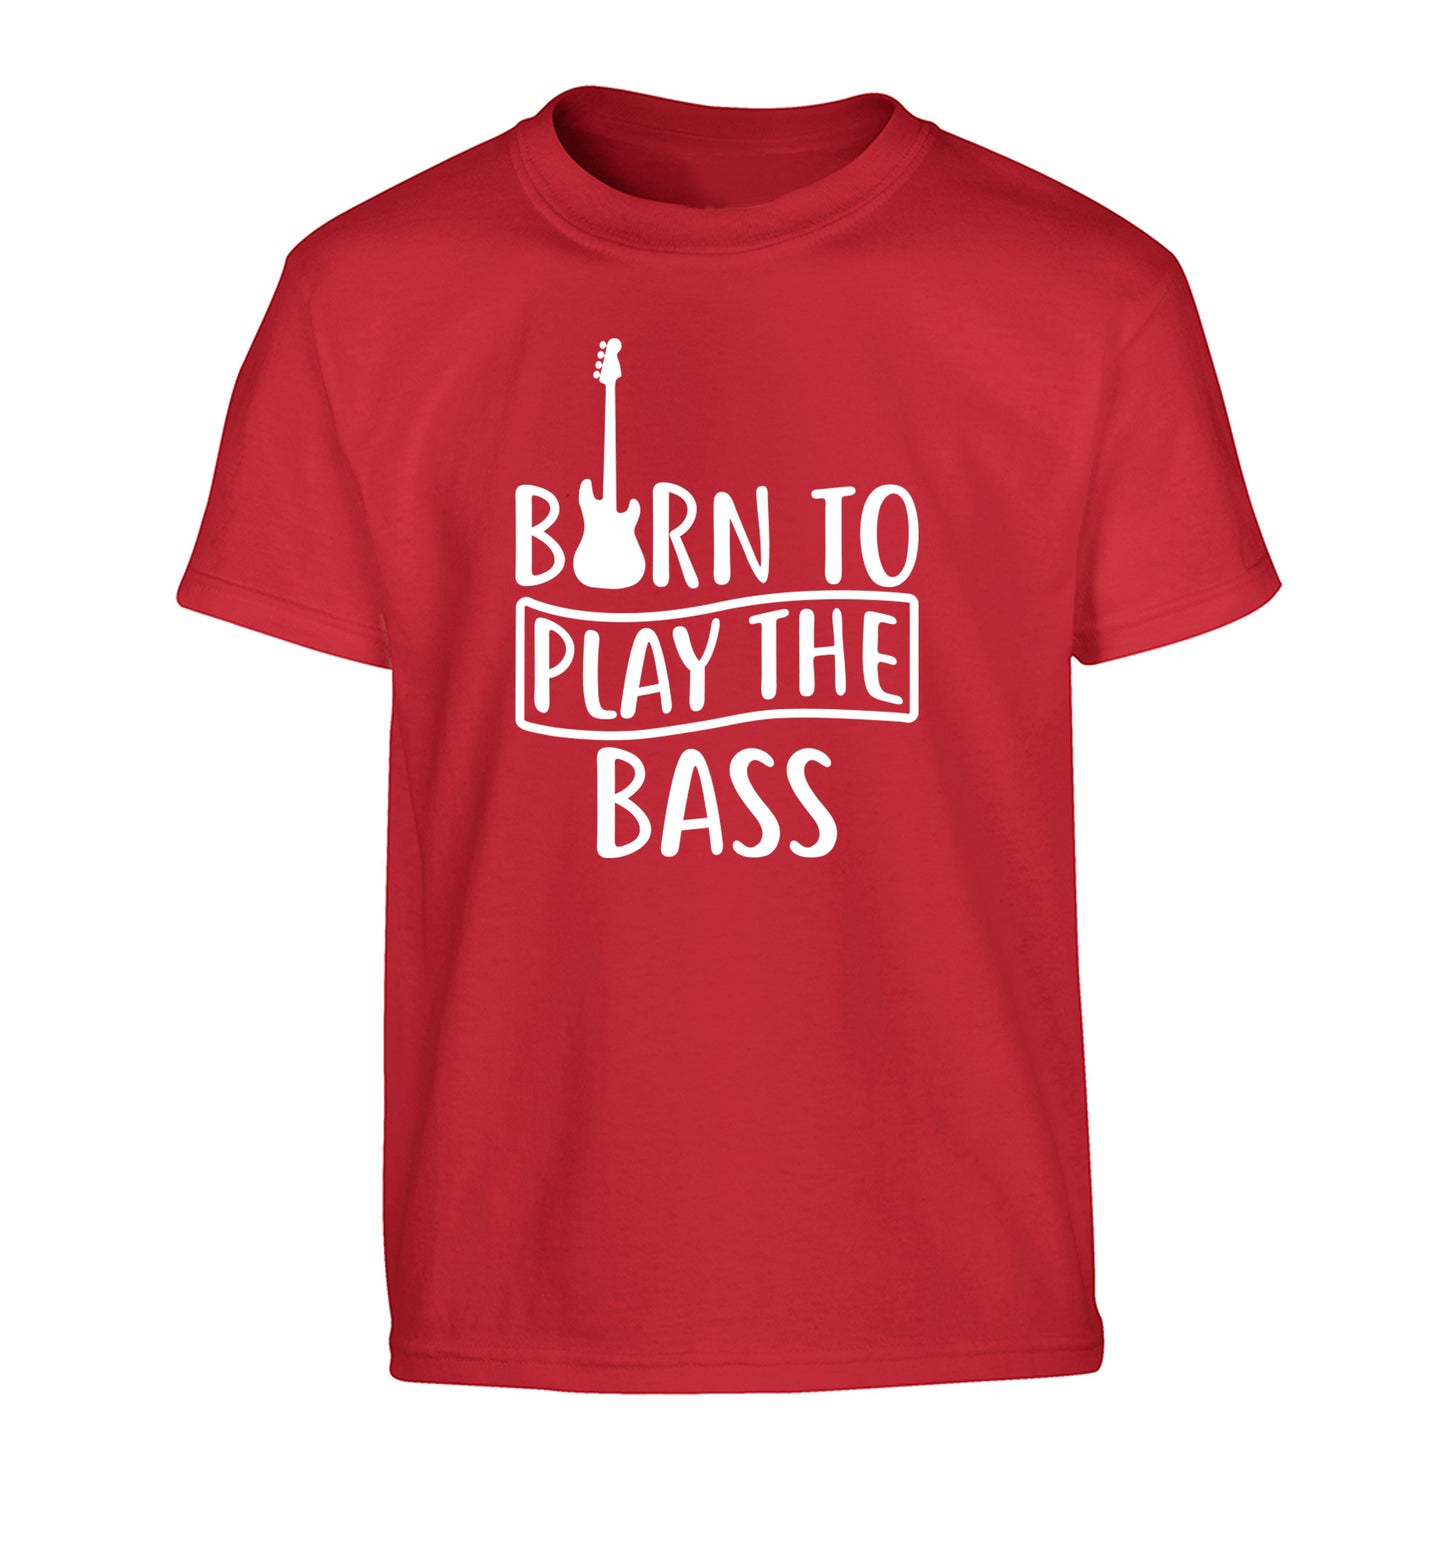 Born to play the bass Children's red Tshirt 12-14 Years